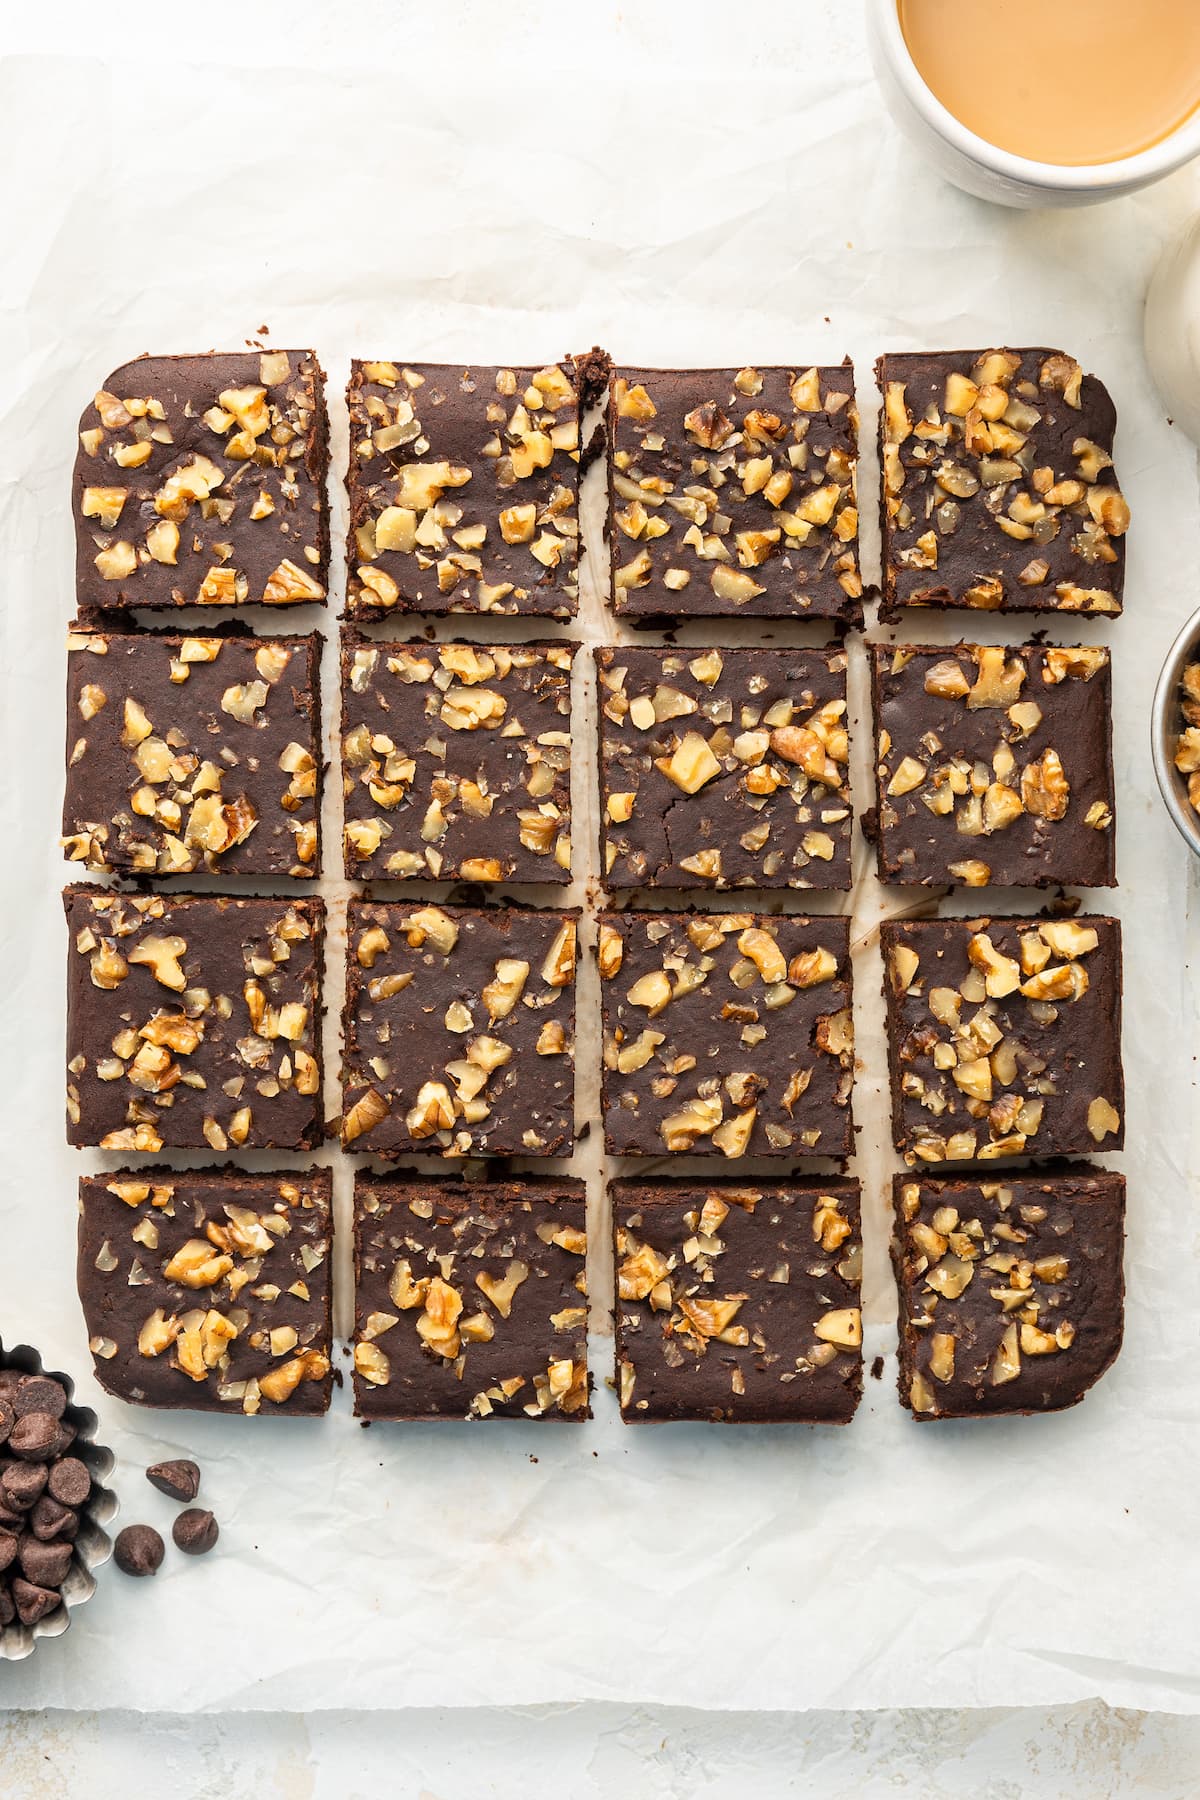 Black bean brownies cut into even squares.